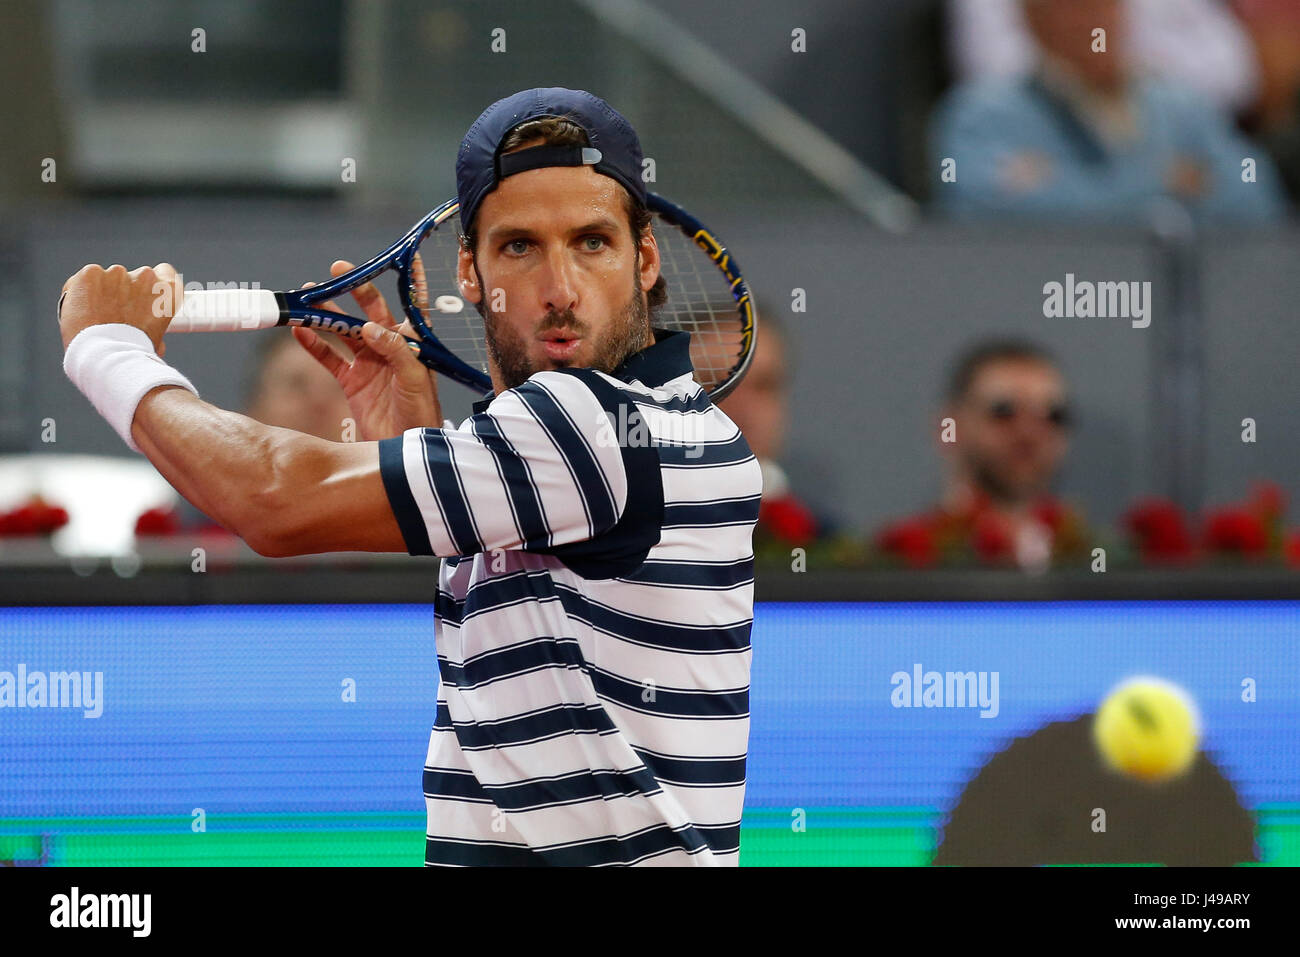 Madrid, Spain. 11th May, 2017. Feliciano Lopez of Spain in action against Novak Djokovic of Serbia during Mutua Madrid Open tennis match at La Caja Magica stadium on Thursday 11, May 2017. Credit: Gtres Información más Comuniación on line,S.L./Alamy Live News Stock Photo